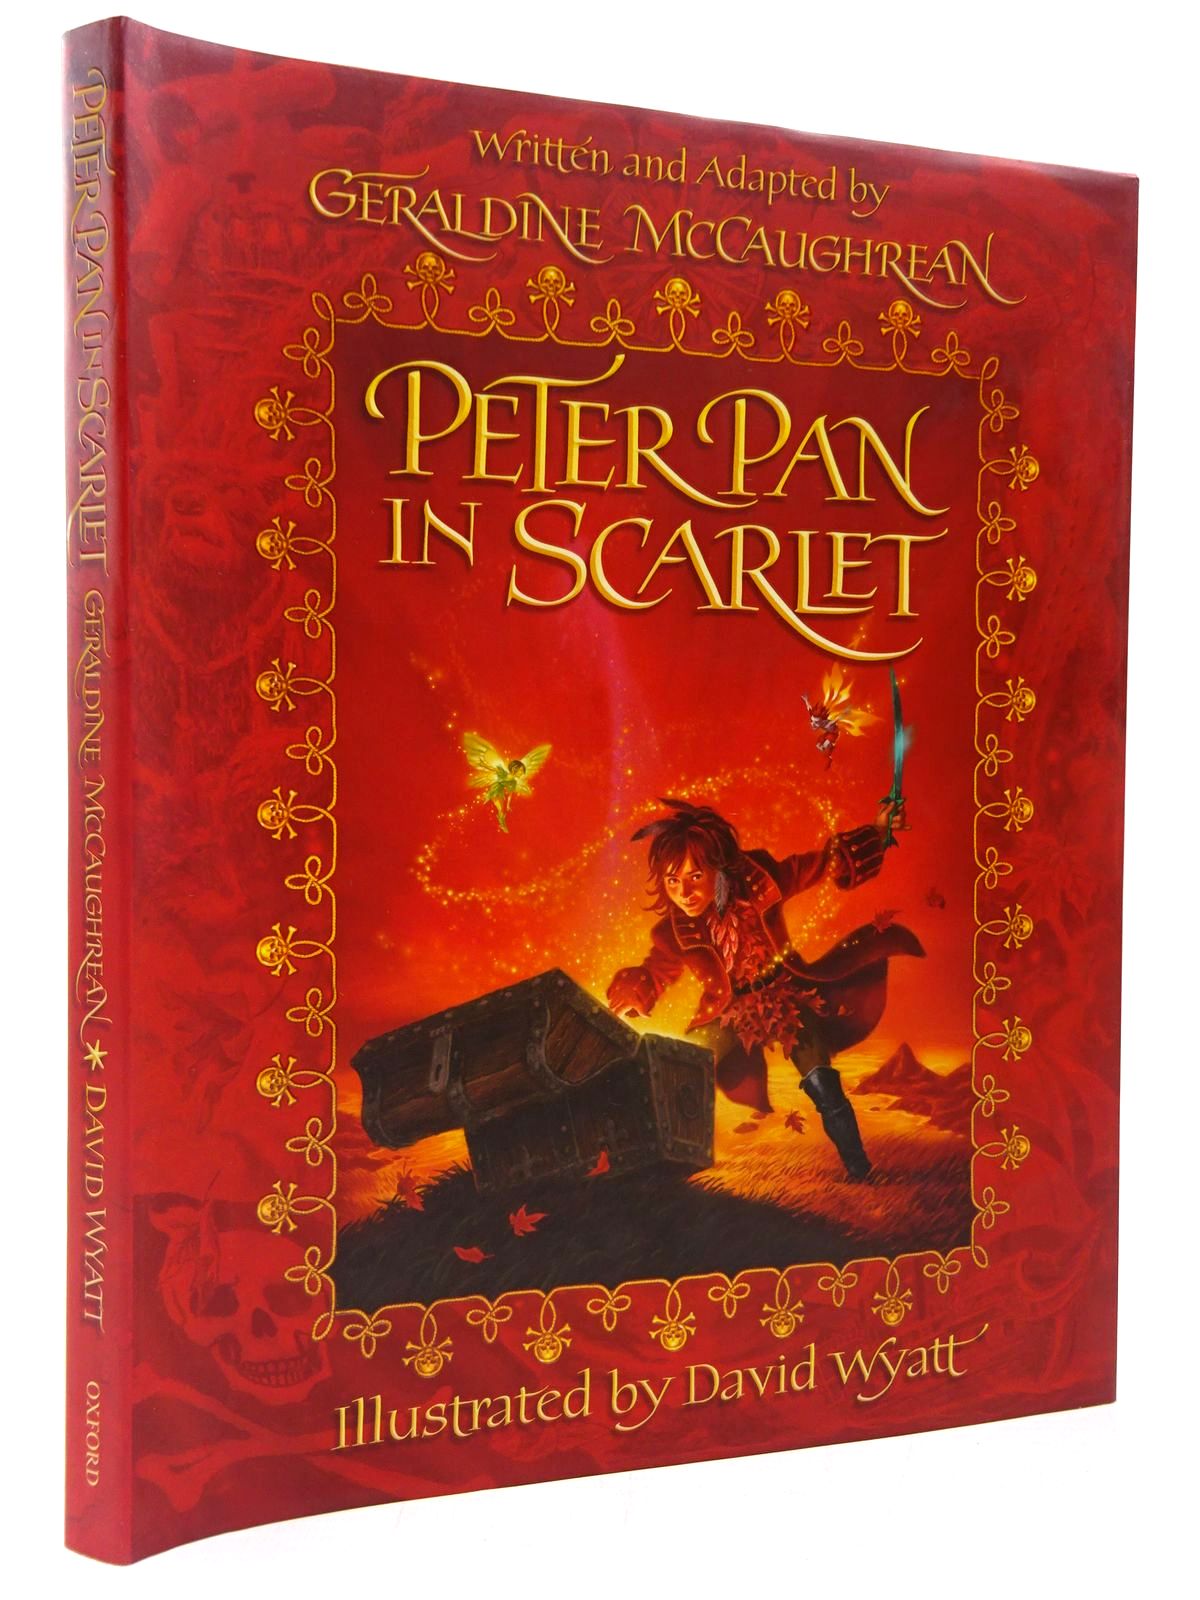 Photo of PETER PAN IN SCARLET written by McCaughrean, Geraldine illustrated by Wyatt, David published by Oxford University Press (STOCK CODE: 2130465)  for sale by Stella & Rose's Books